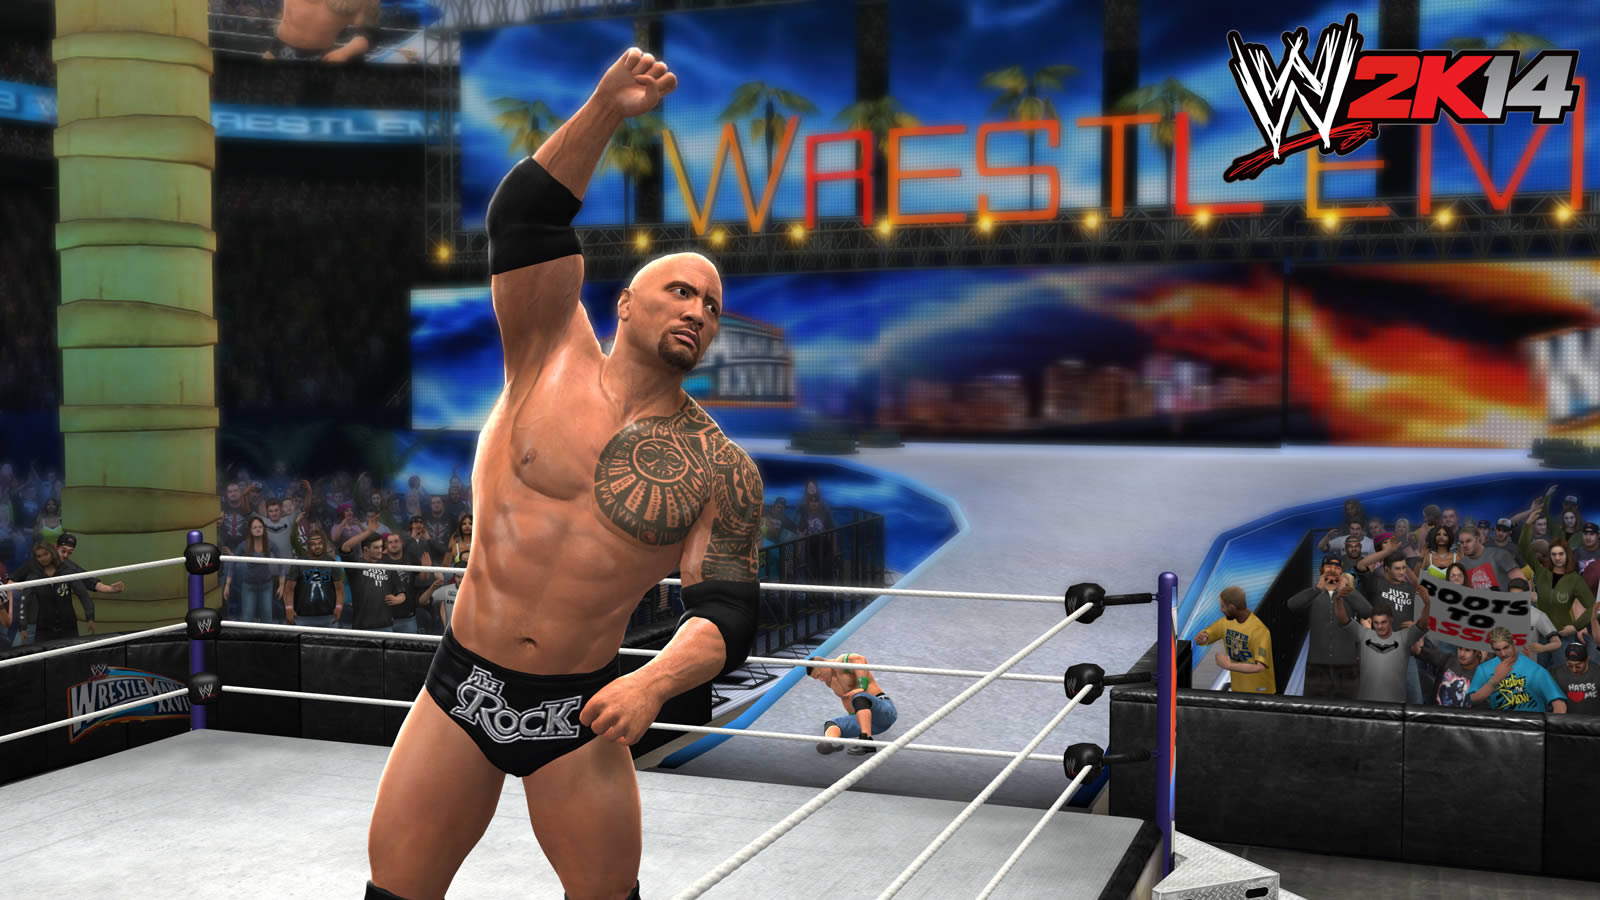 download wwe 2k14 for pc